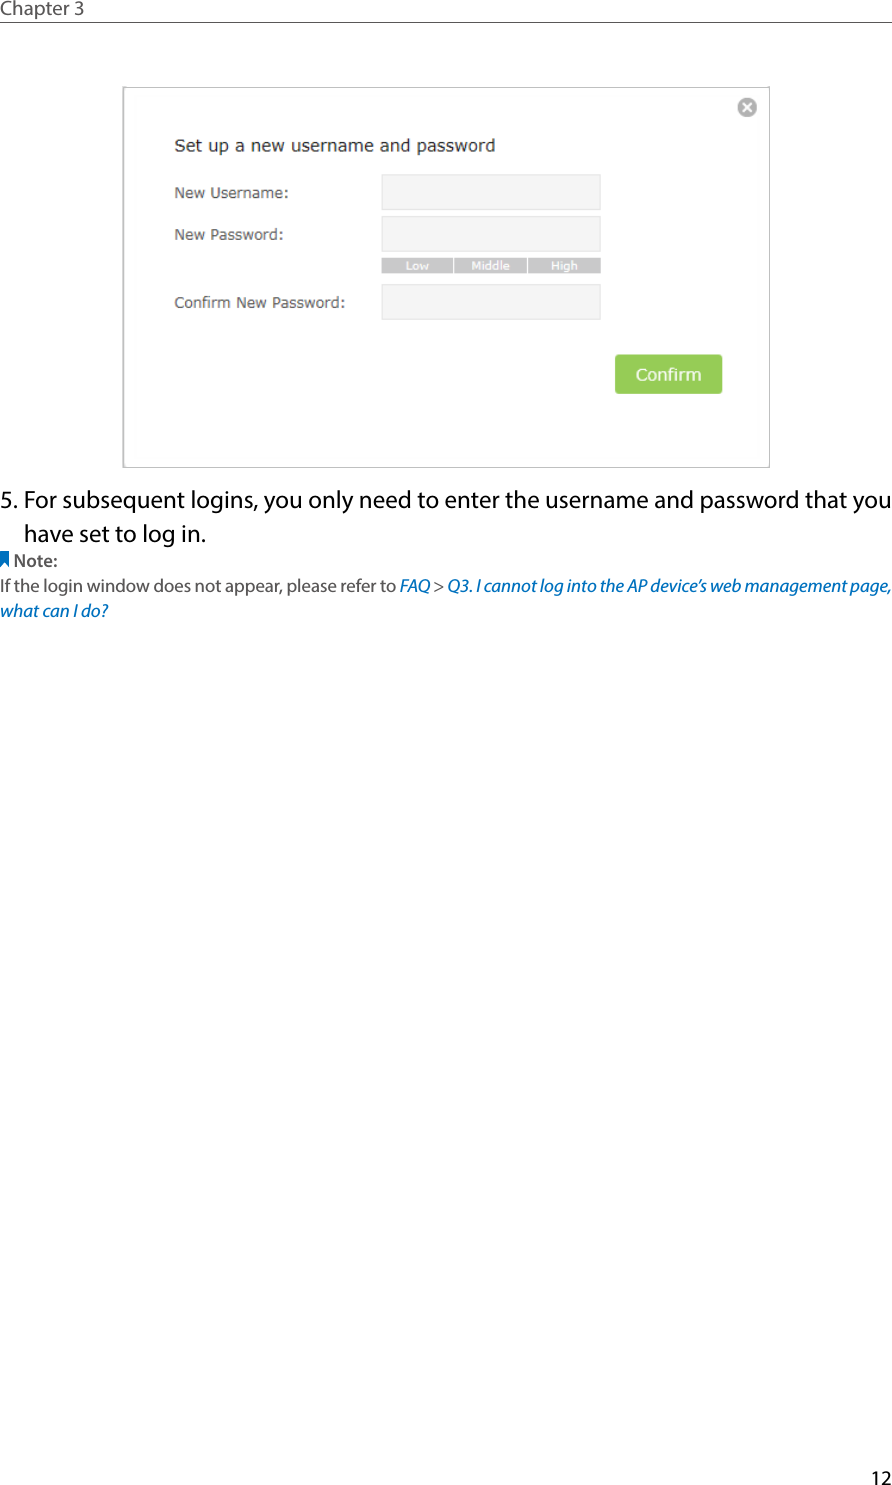 12Chapter 3  5. For subsequent logins, you only need to enter the username and password that you have set to log in.Note: If the login window does not appear, please refer to FAQ &gt; Q3. I cannot log into the AP device’s web management page, what can I do?